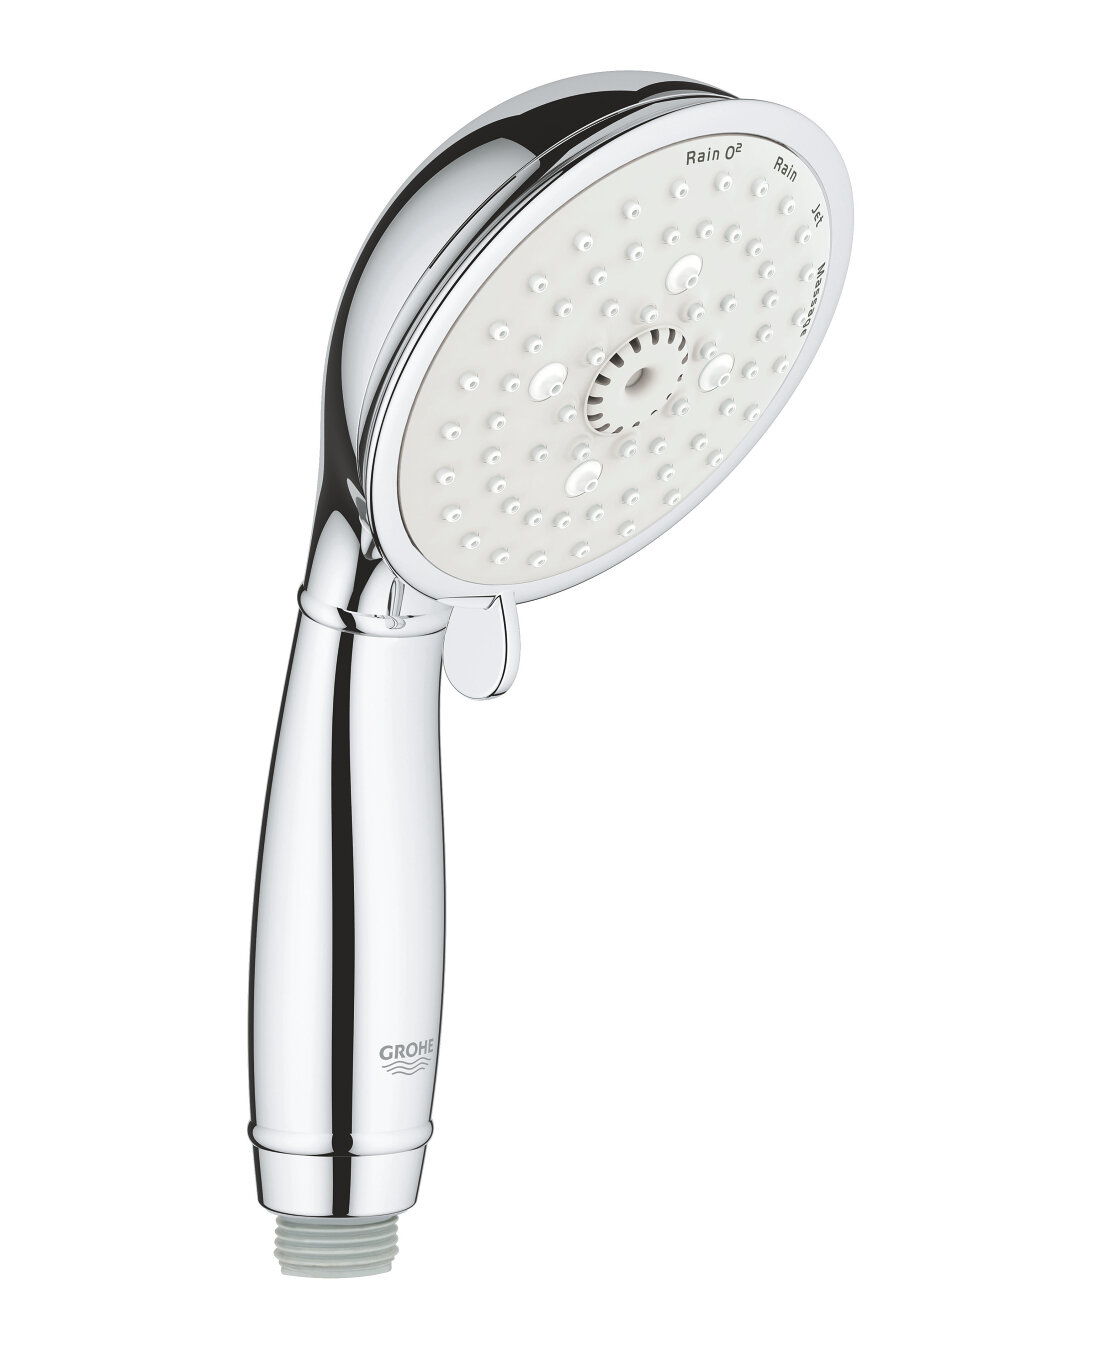   Grohe Tempesta Rustic IV, 9.5 /,  27608001